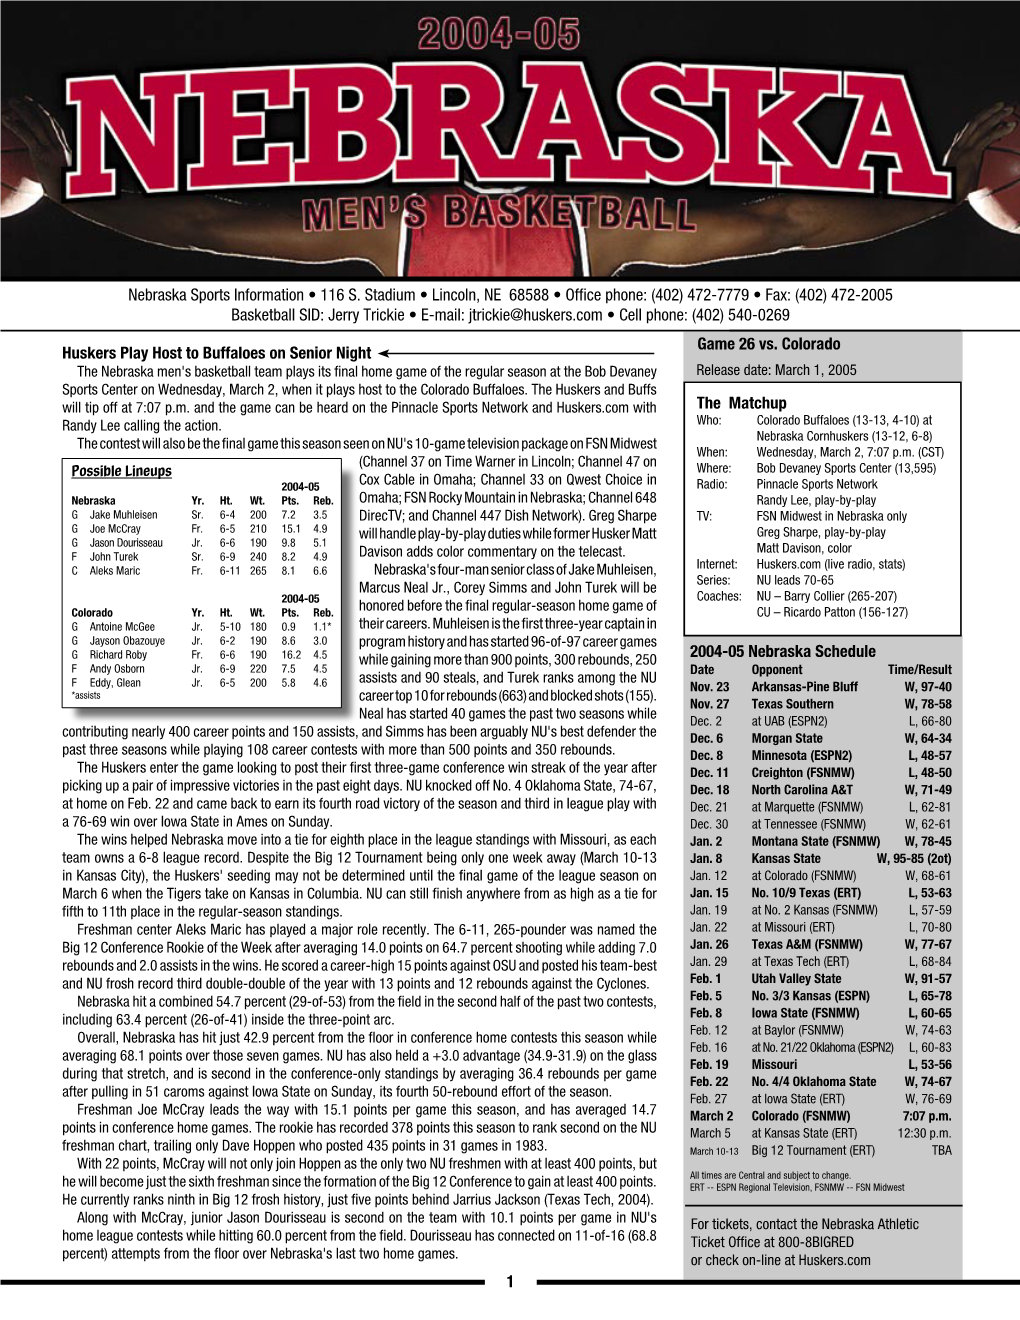 1 Huskers Play Host to Buffaloes on Senior Night